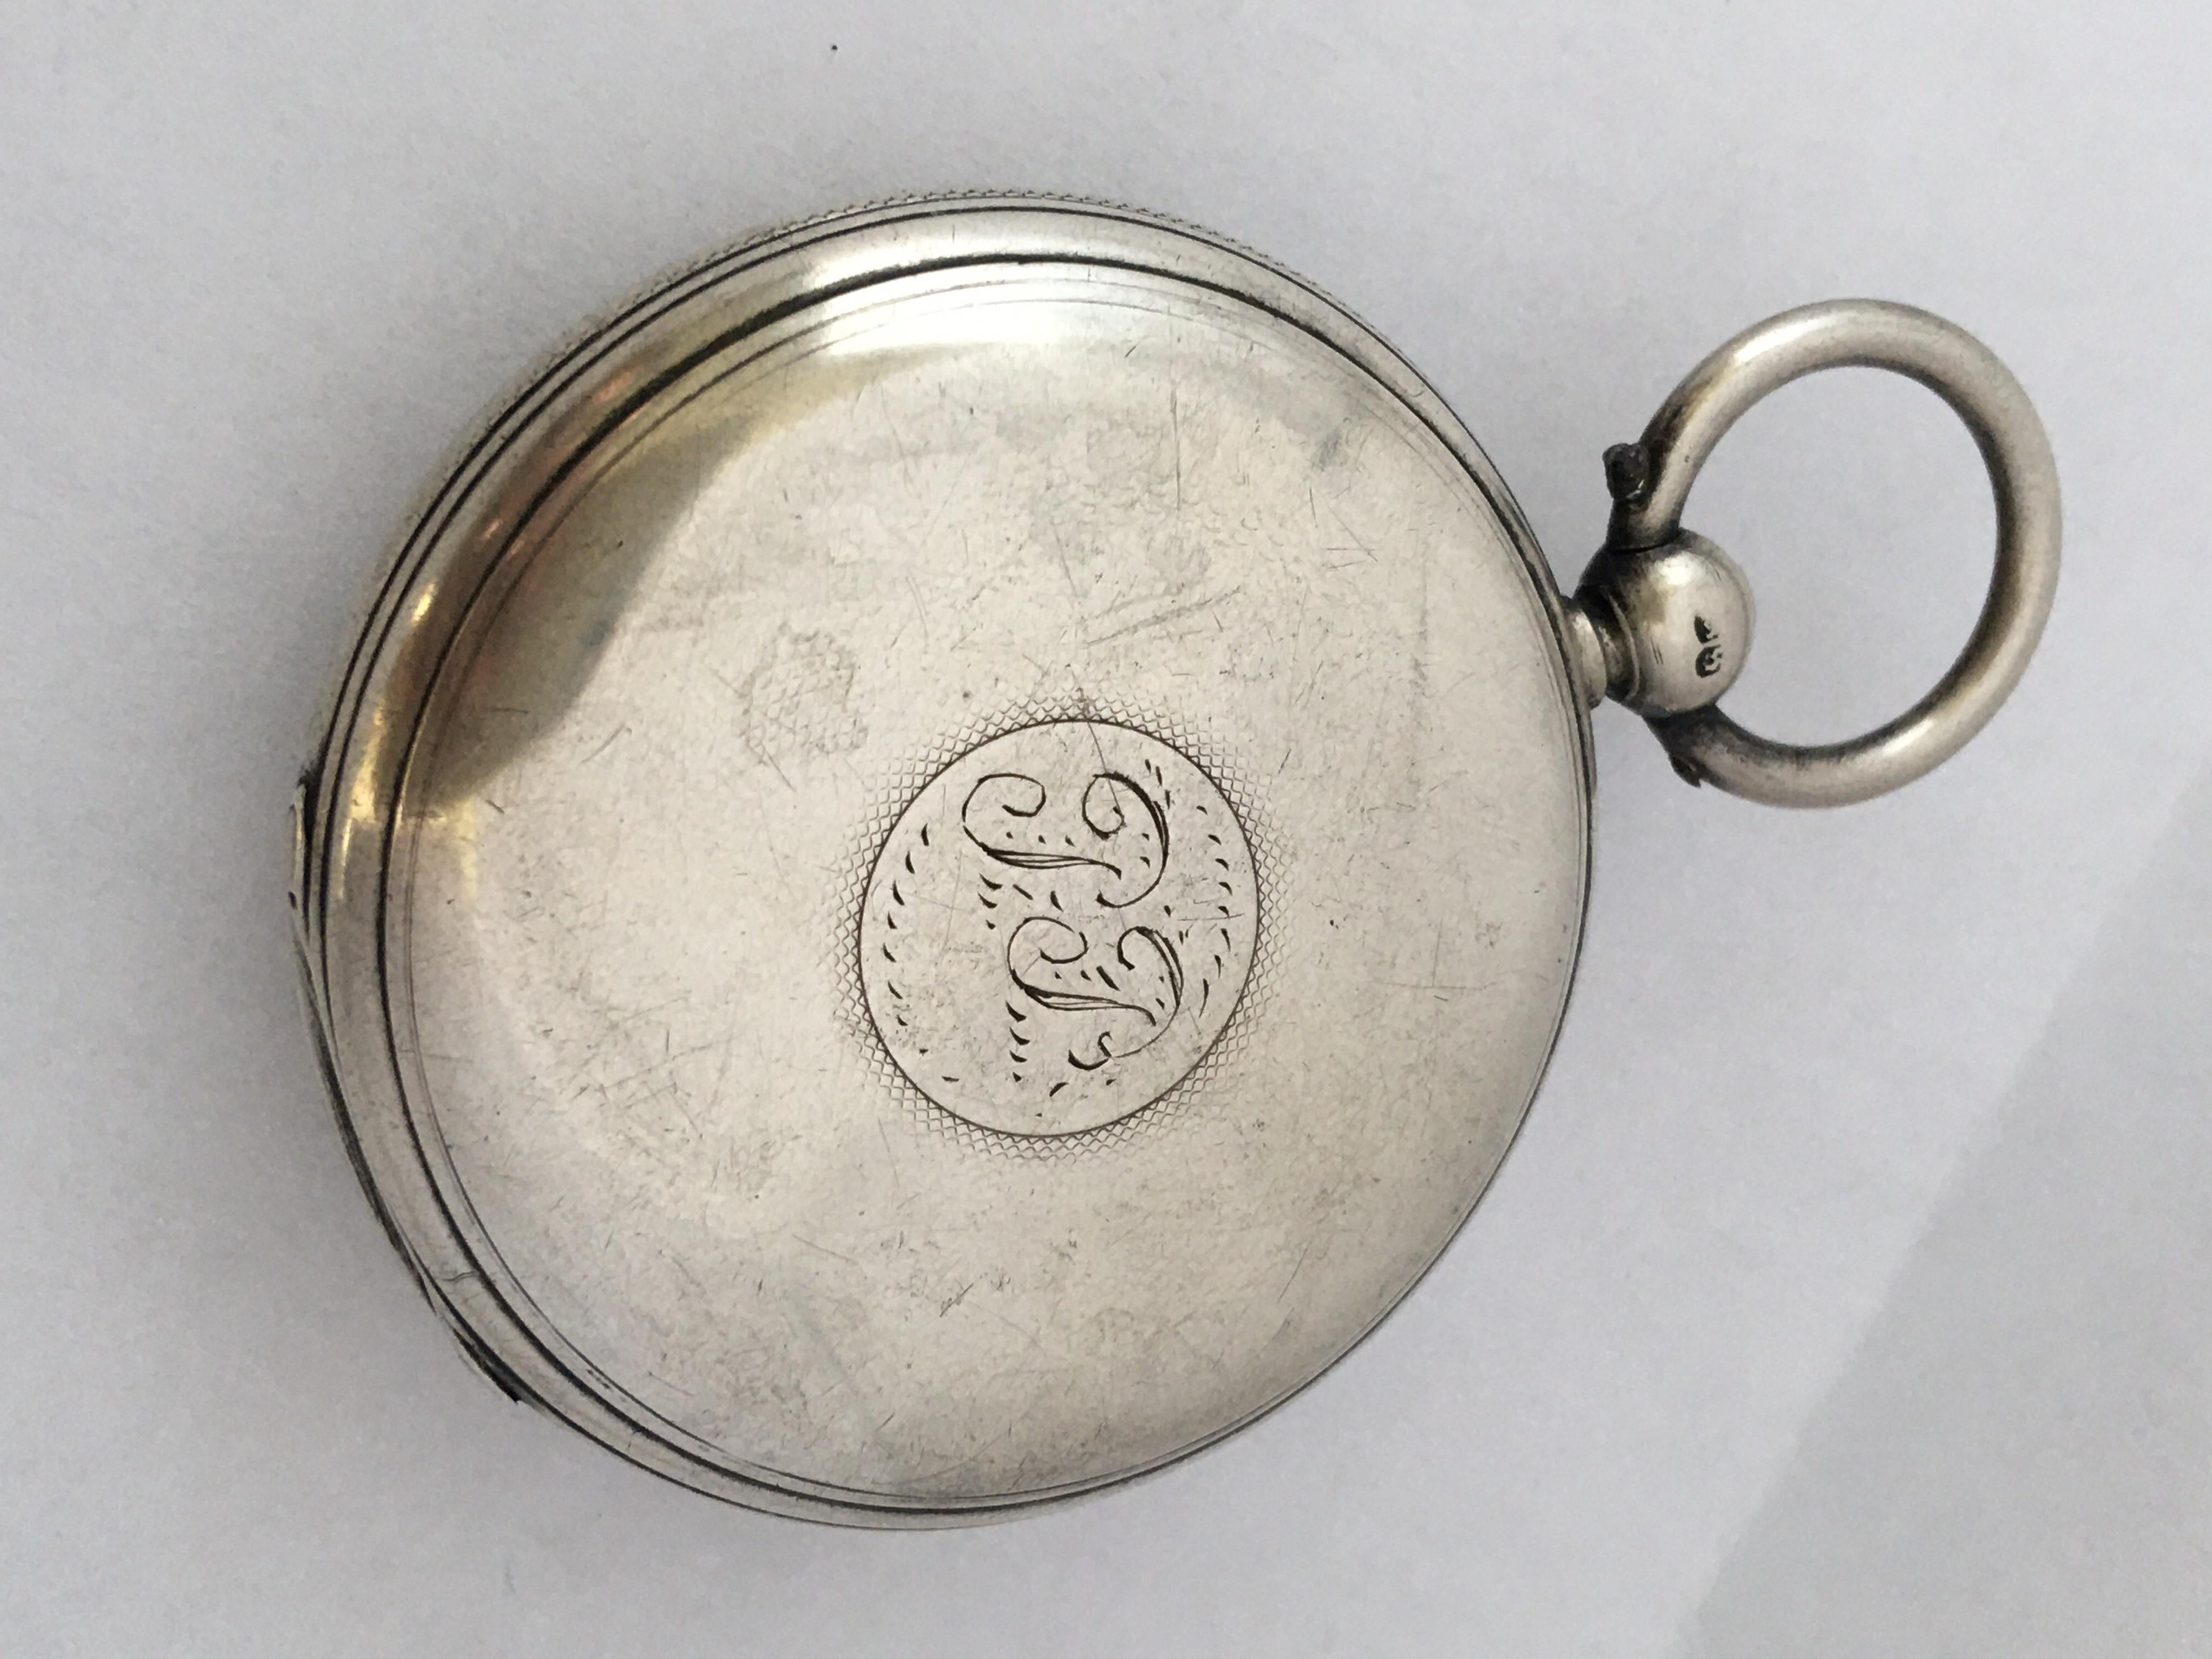 Antique Silver Key-Winding Pocket Watch Signed Charles Reeves, Hereford ...